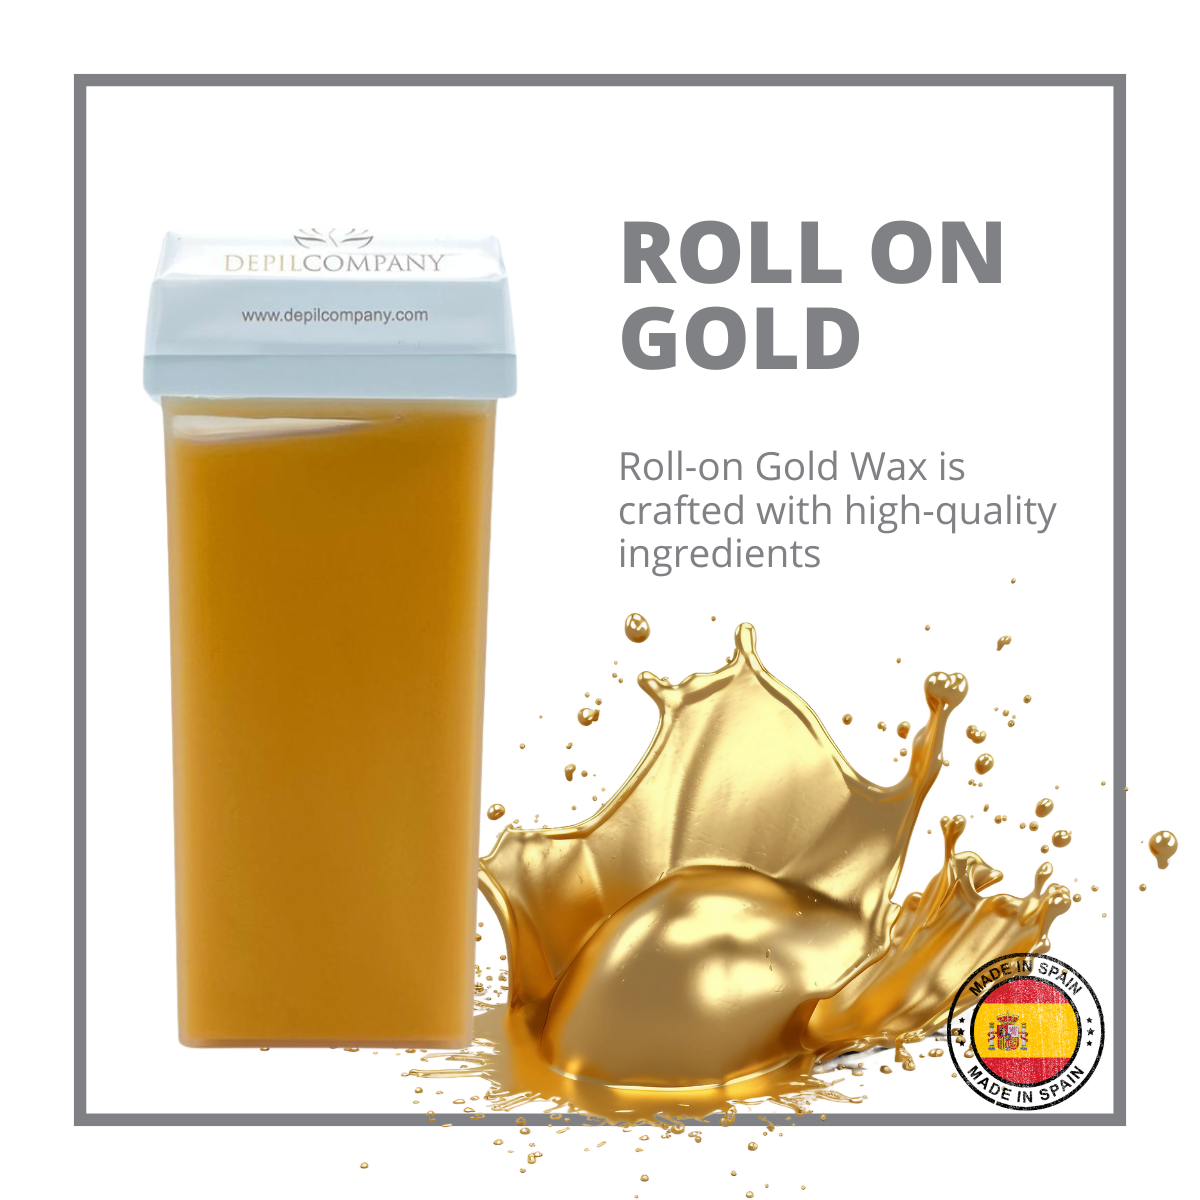 Depilcompany Roll-on Gold wax crafted with high-quality ingredients, 6 units